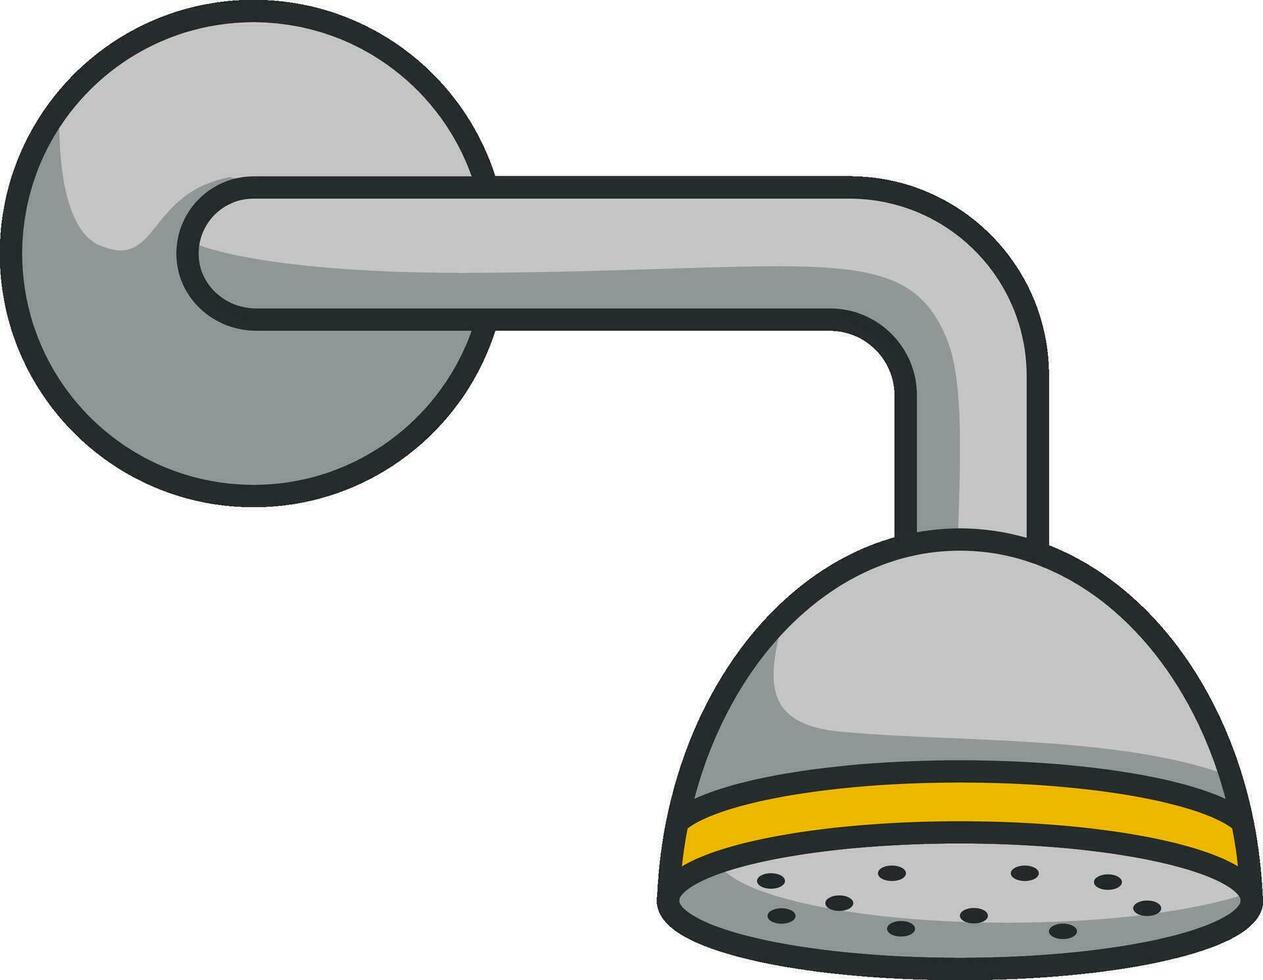 Shower head icon in flat color style. Bathroom hygiene equipment vector